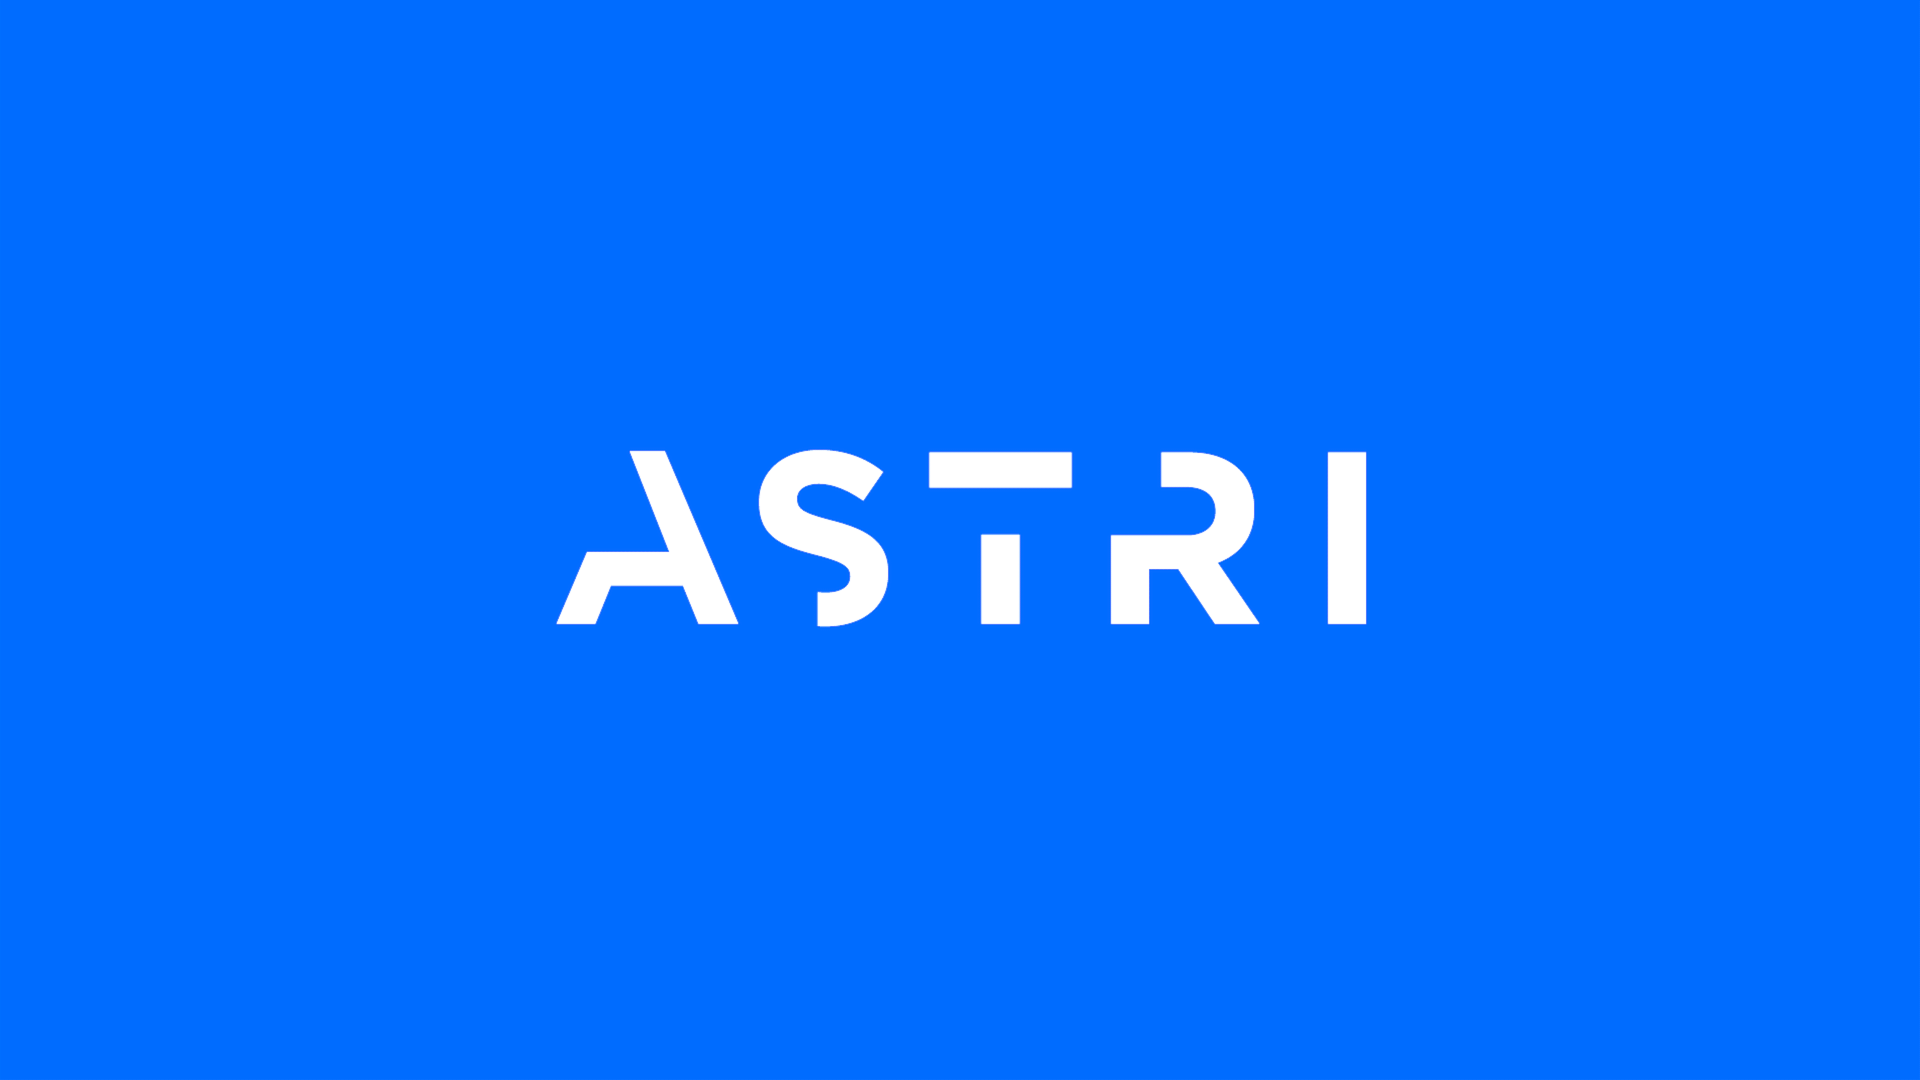 ASTRI logo animation with pattern